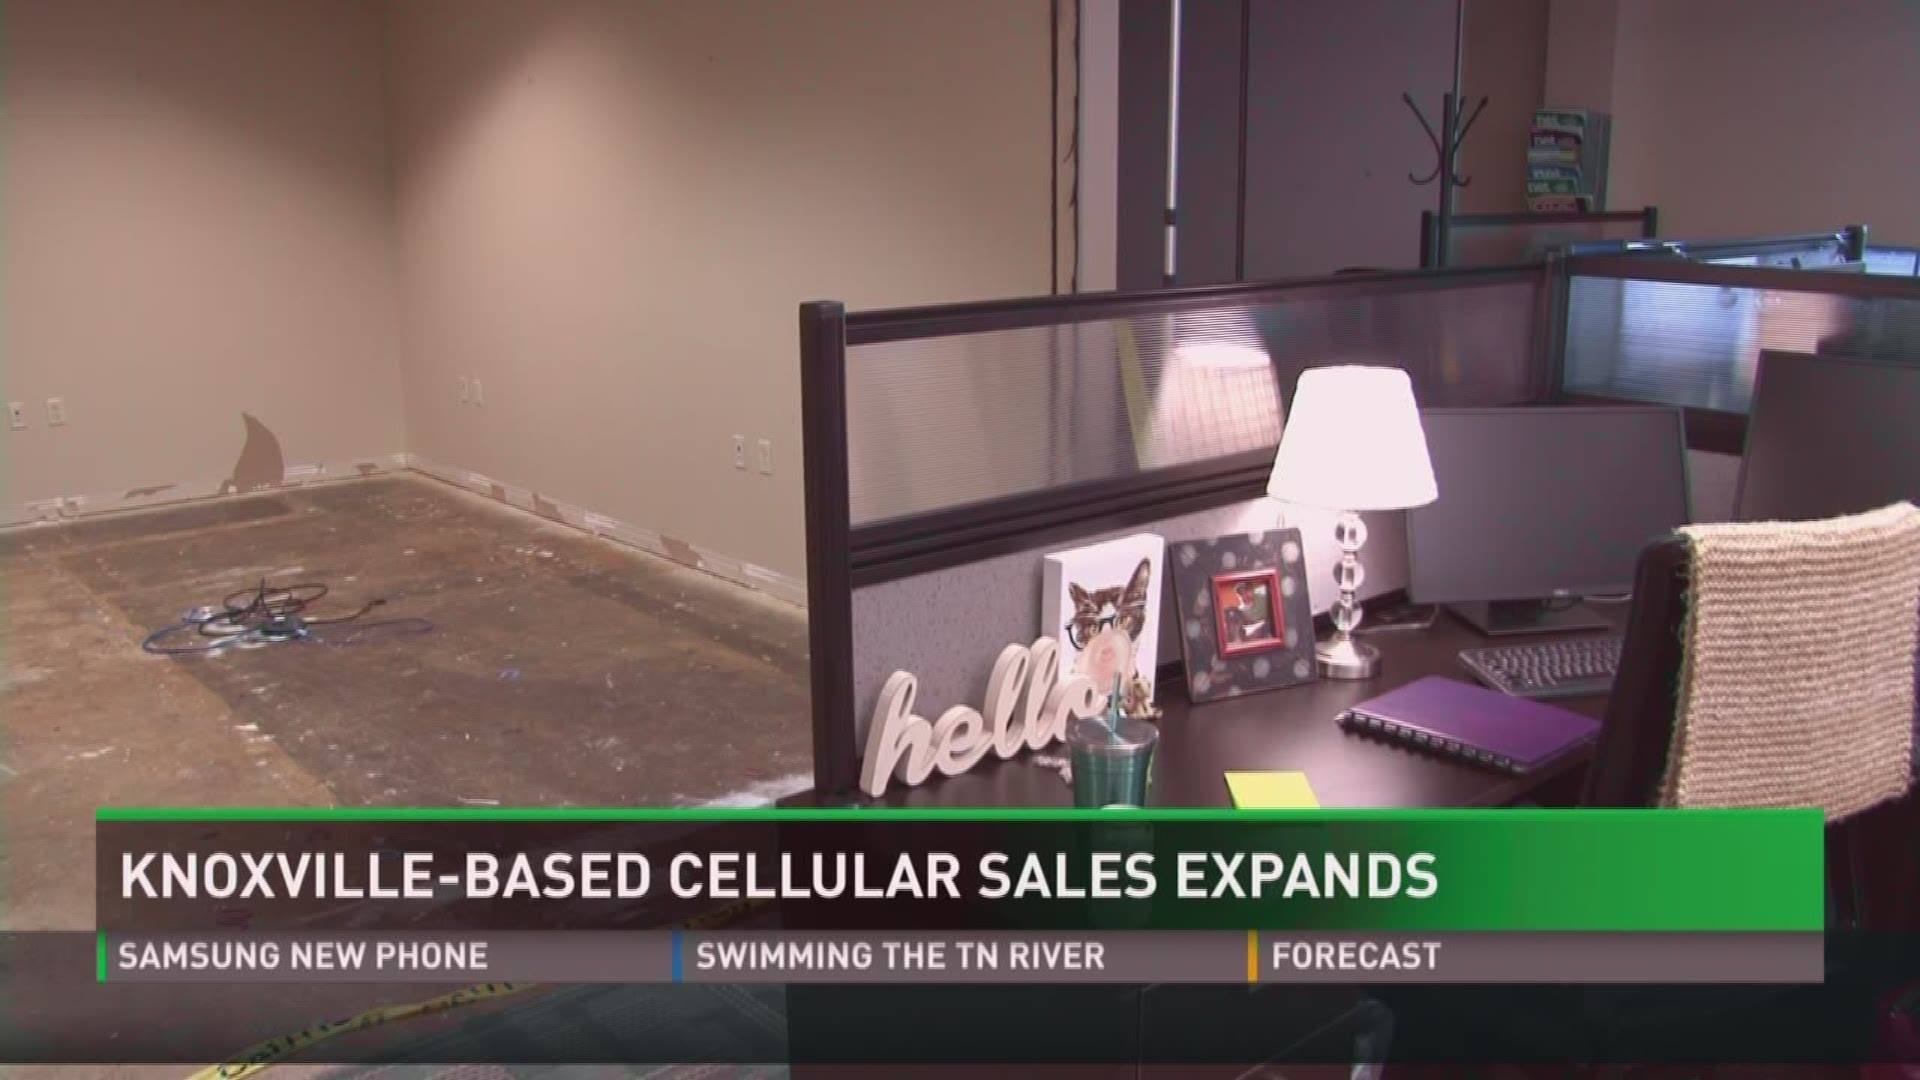 The corporate headquarters for a Knoxville cellular company is expanding and hiring new employees in 2017. 